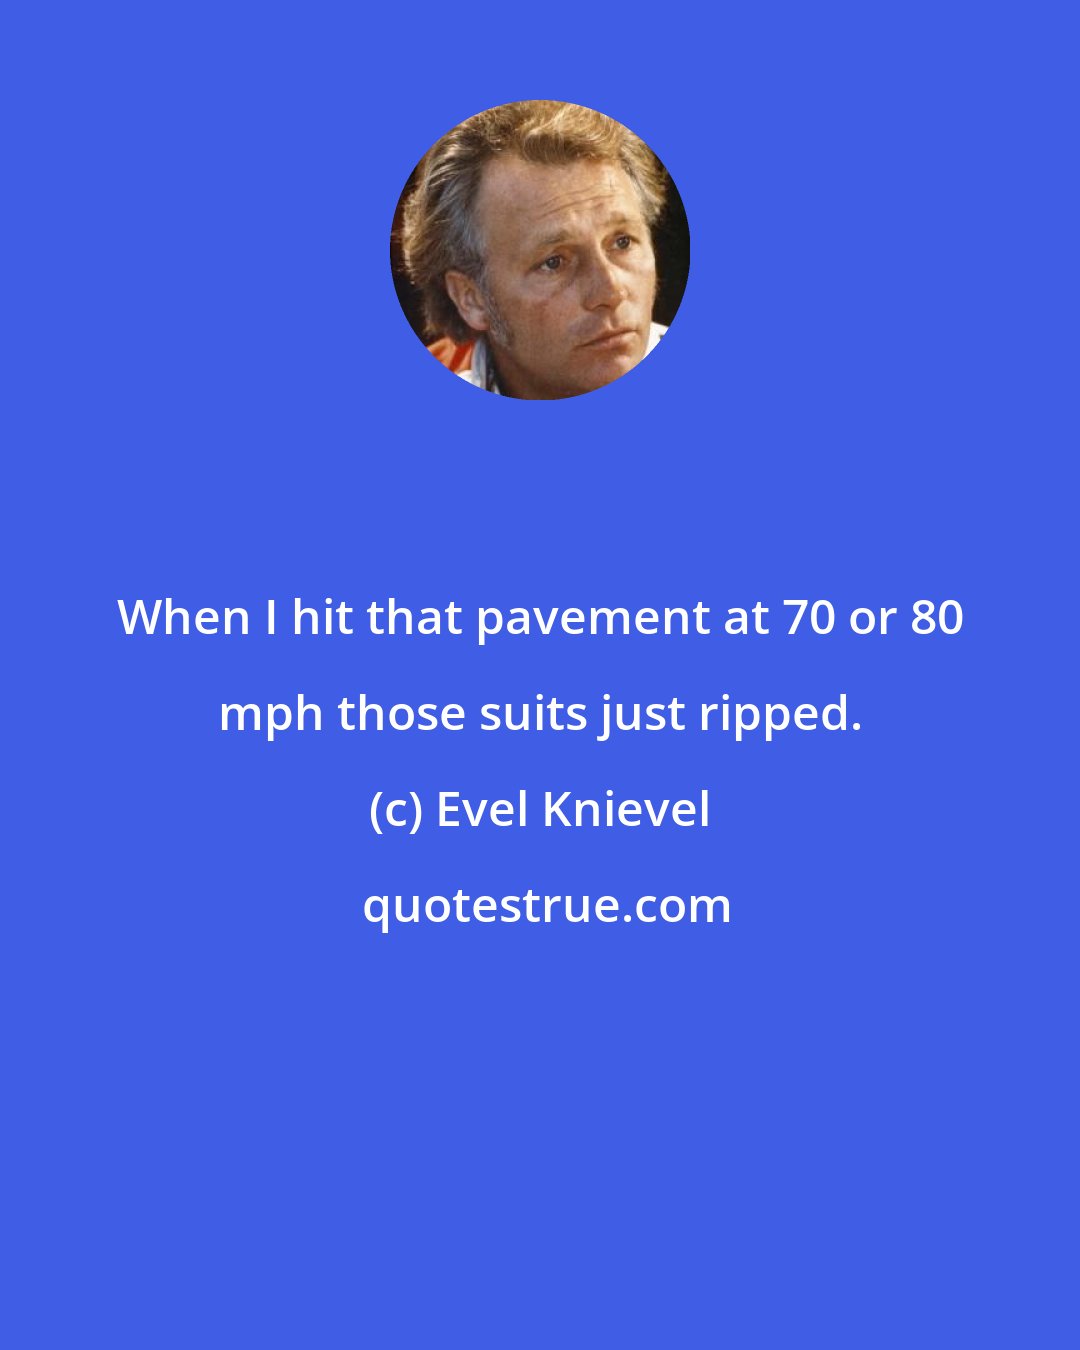 Evel Knievel: When I hit that pavement at 70 or 80 mph those suits just ripped.